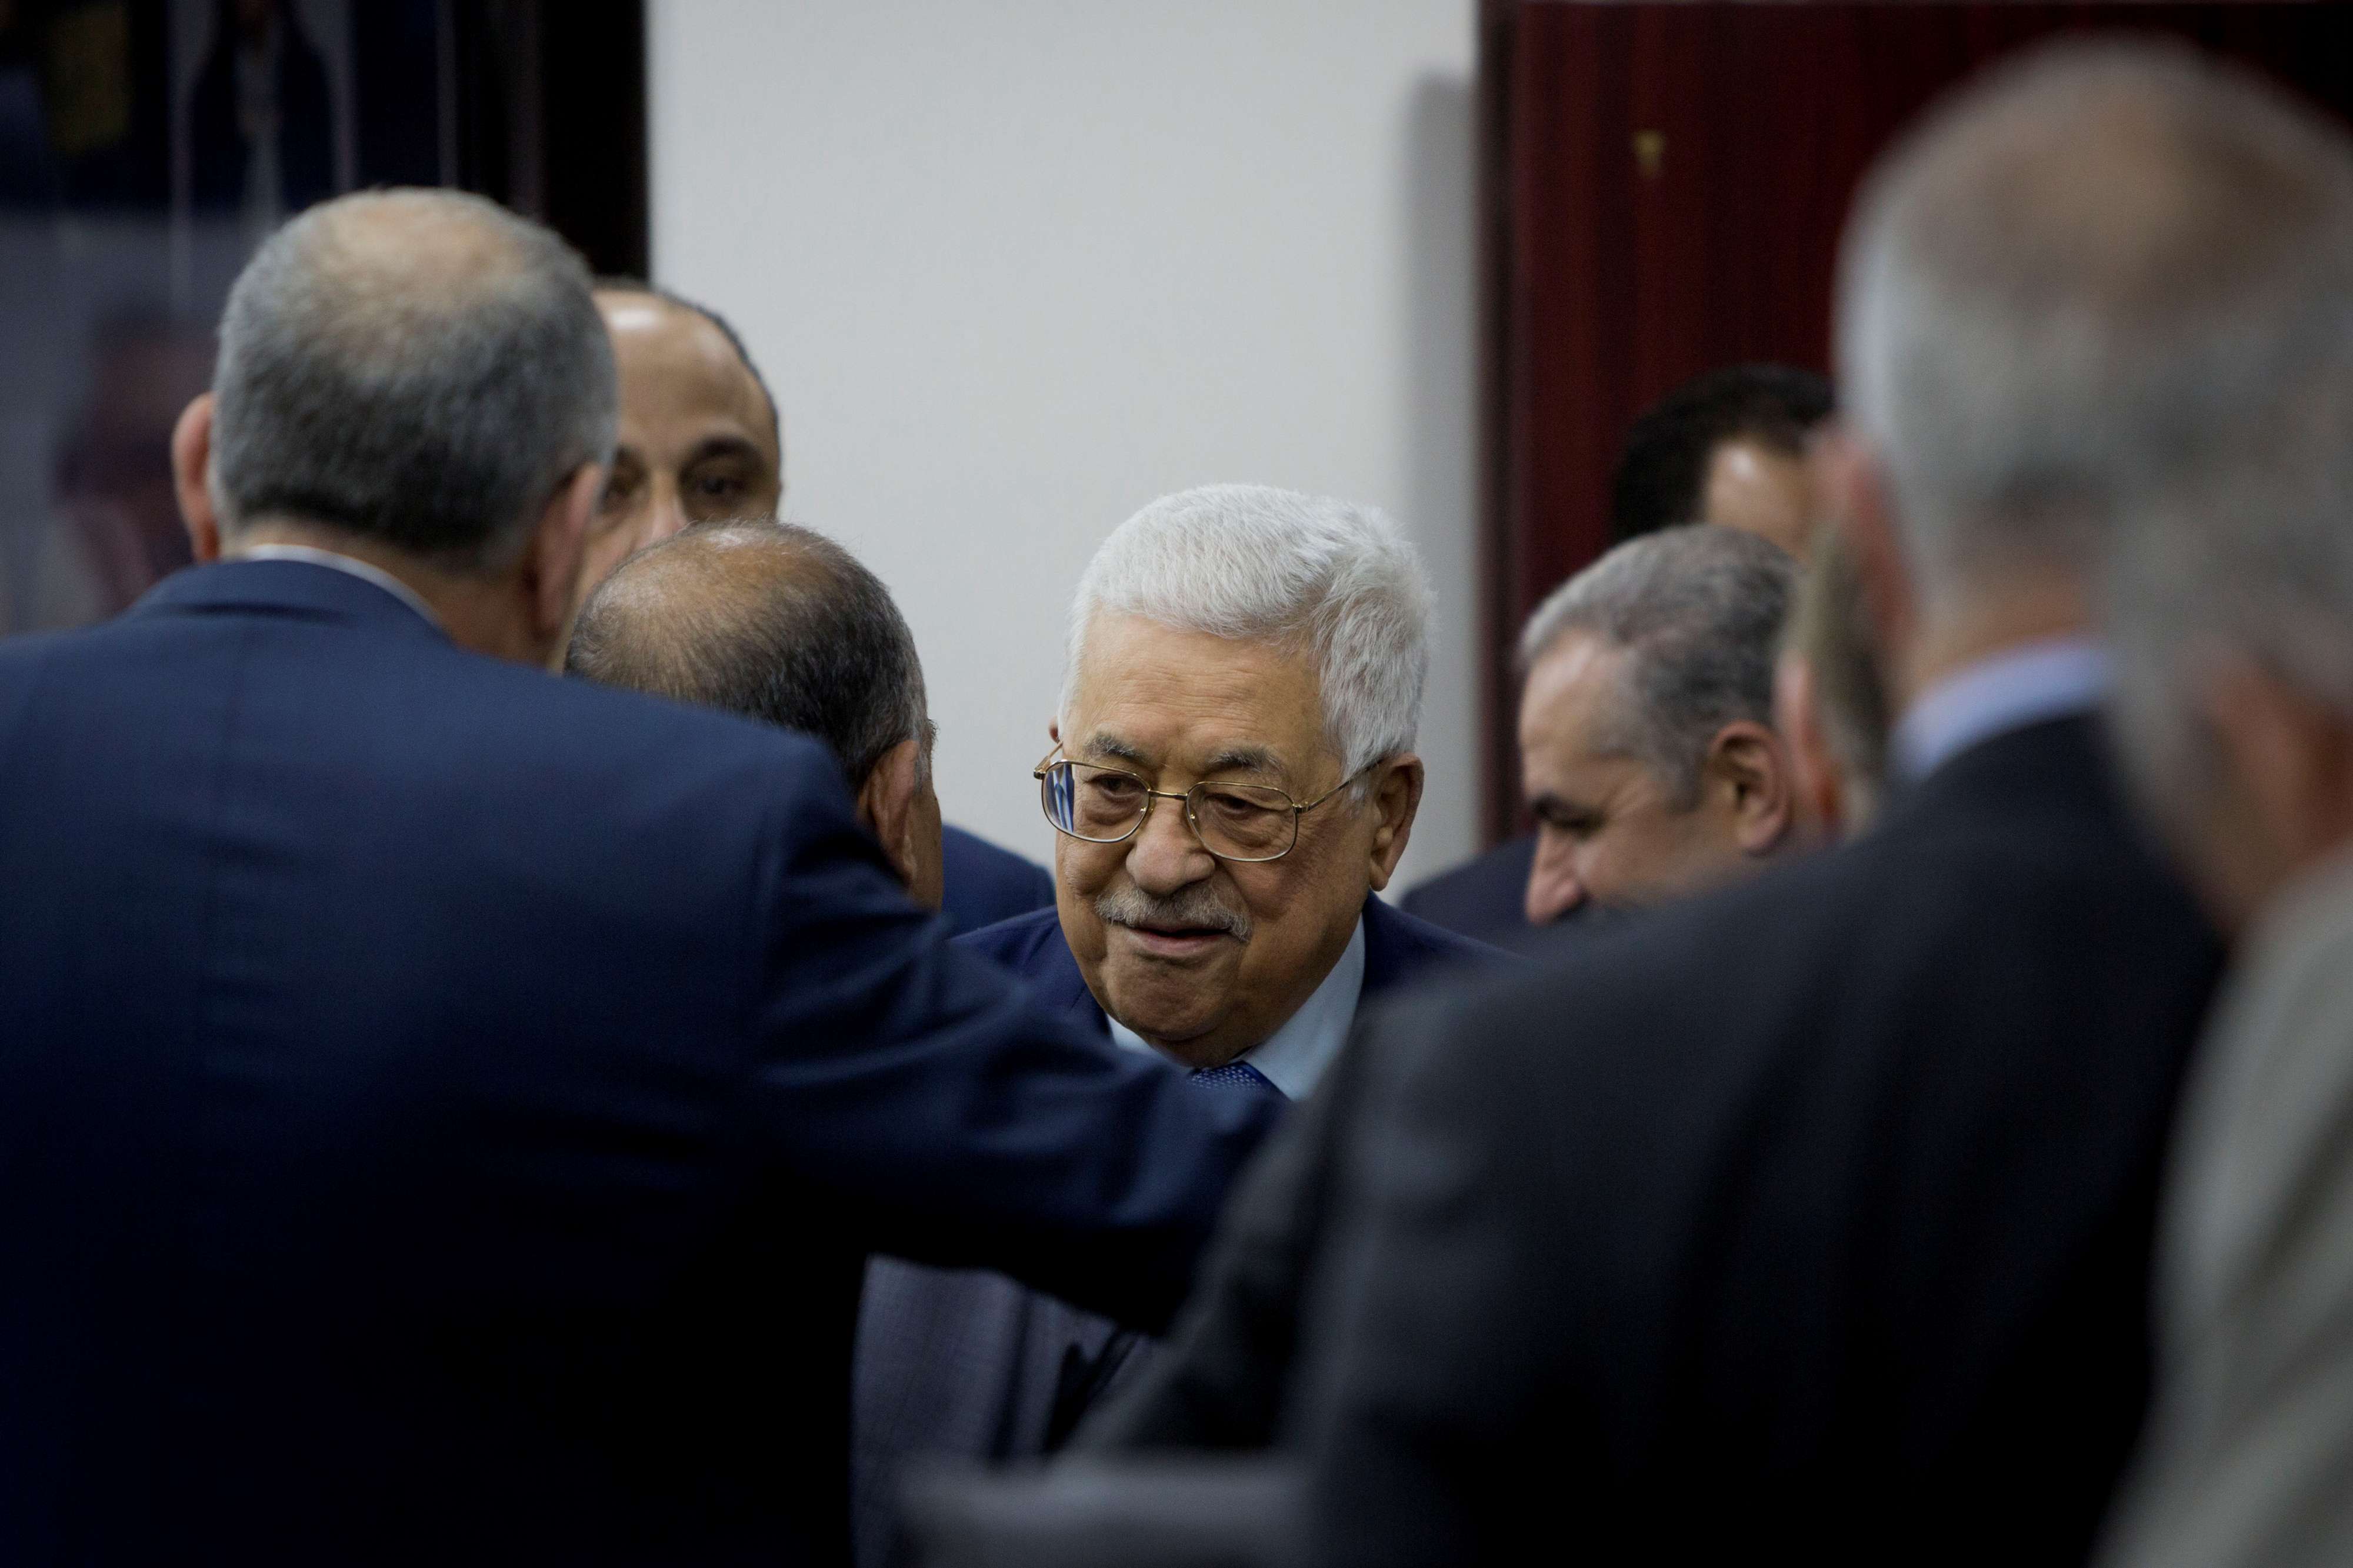 Palestinian President Mahmoud Abbas arrives for a session of the weekly cabinet meeting in Ramallah